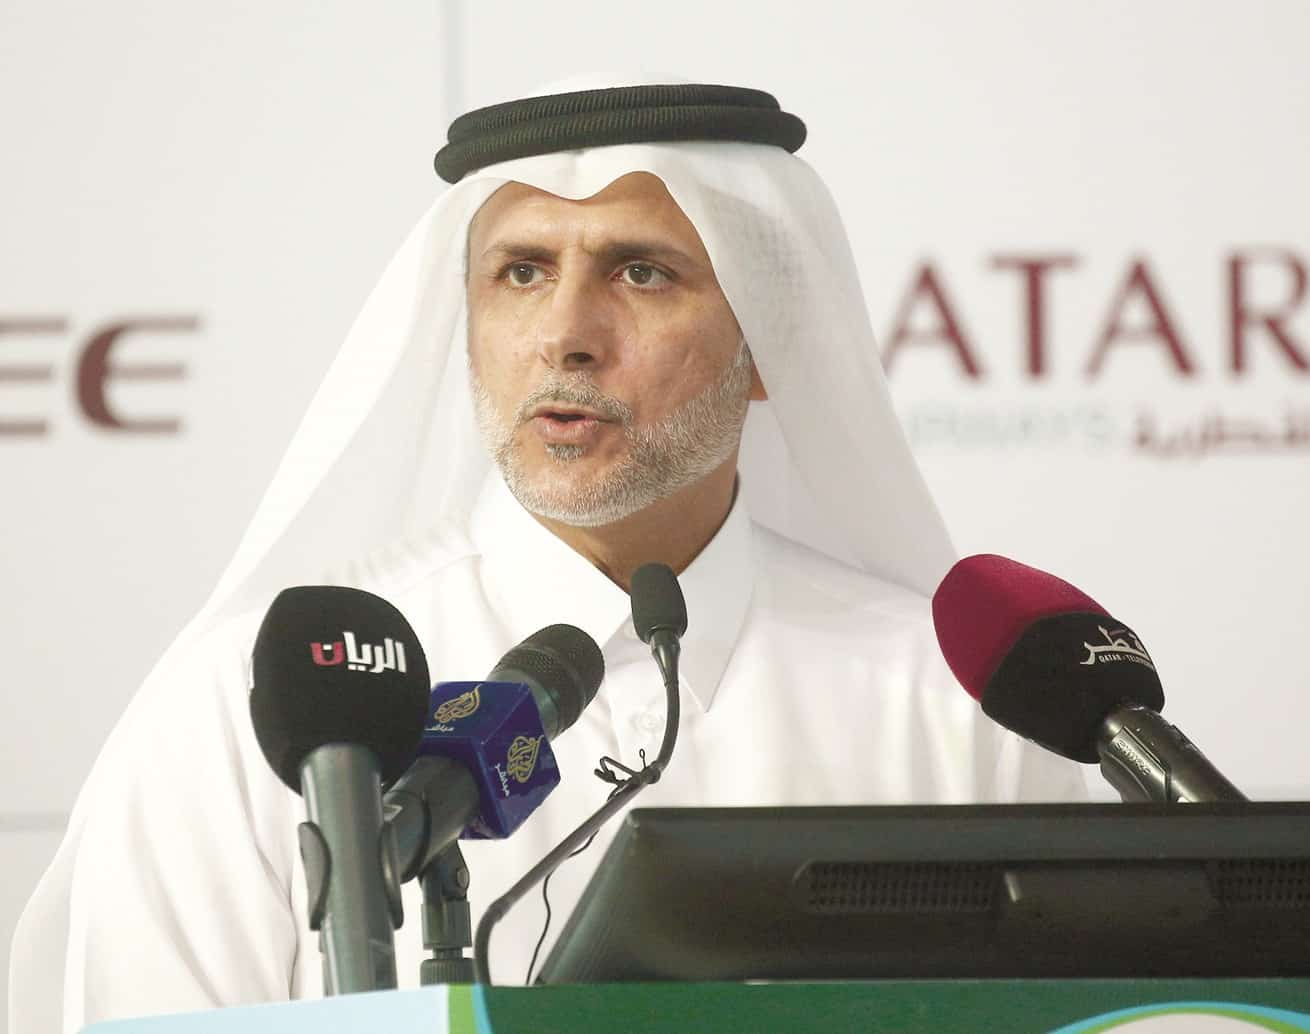 Qatar develops sustainable cities in over a billion sqft